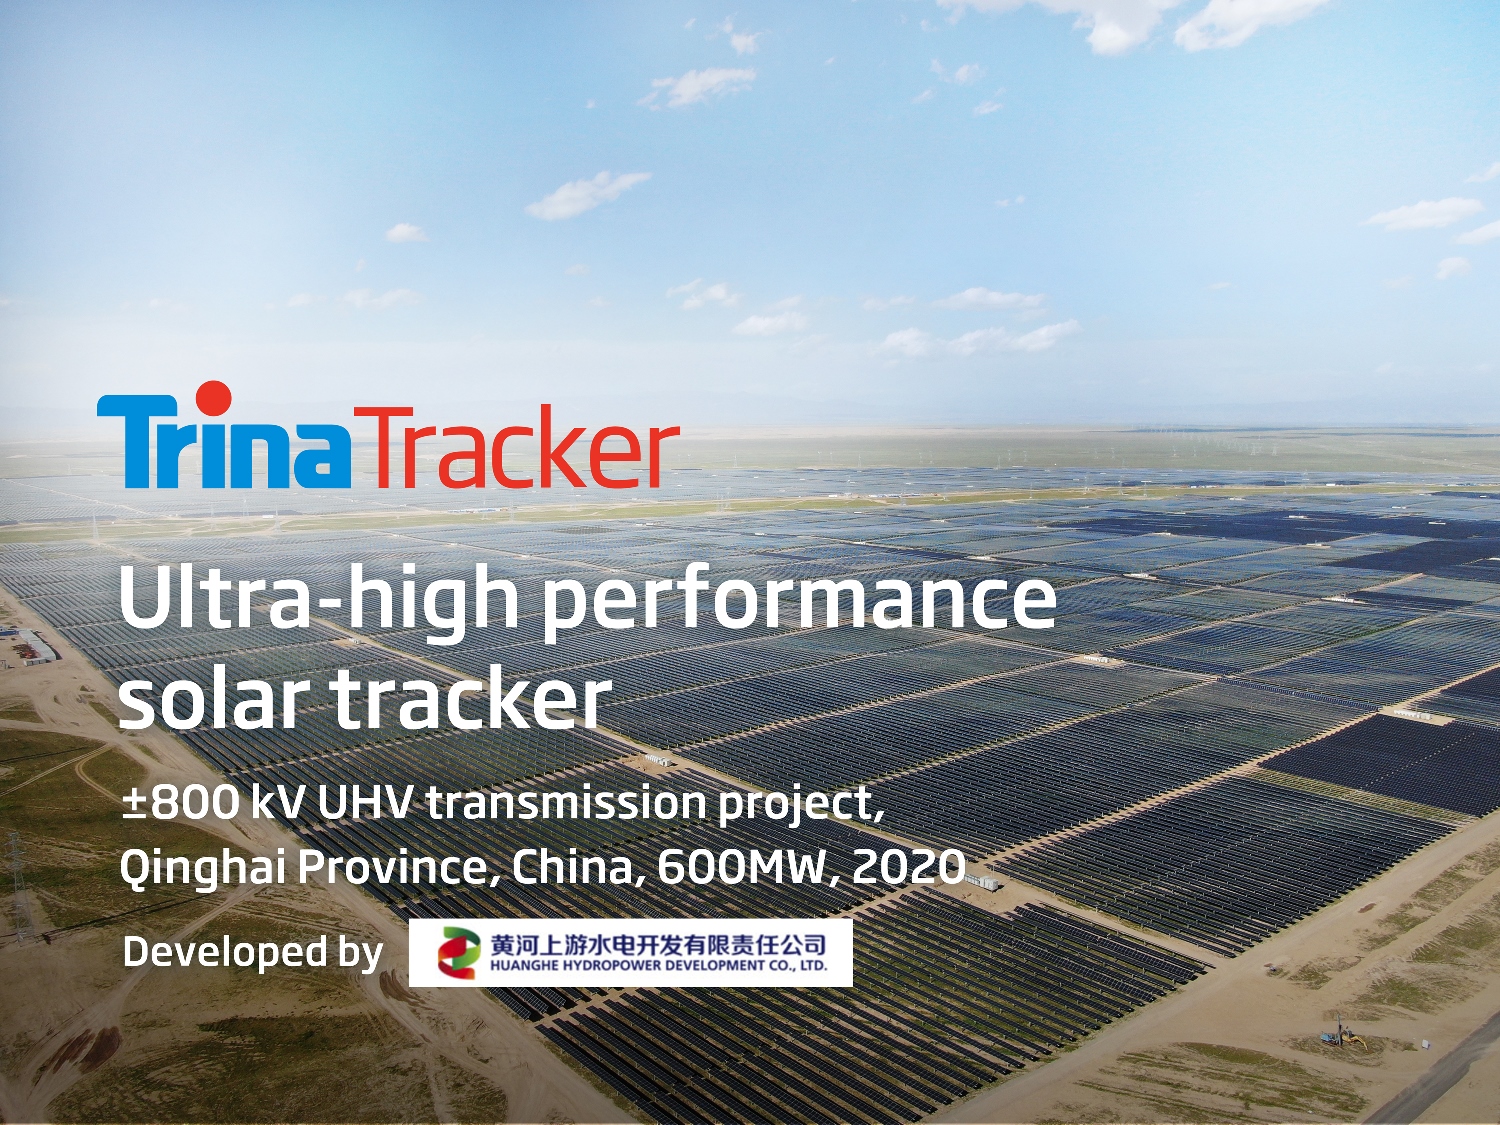 Image for Trina Solar Renews The Global Brand For Its Tracker Business